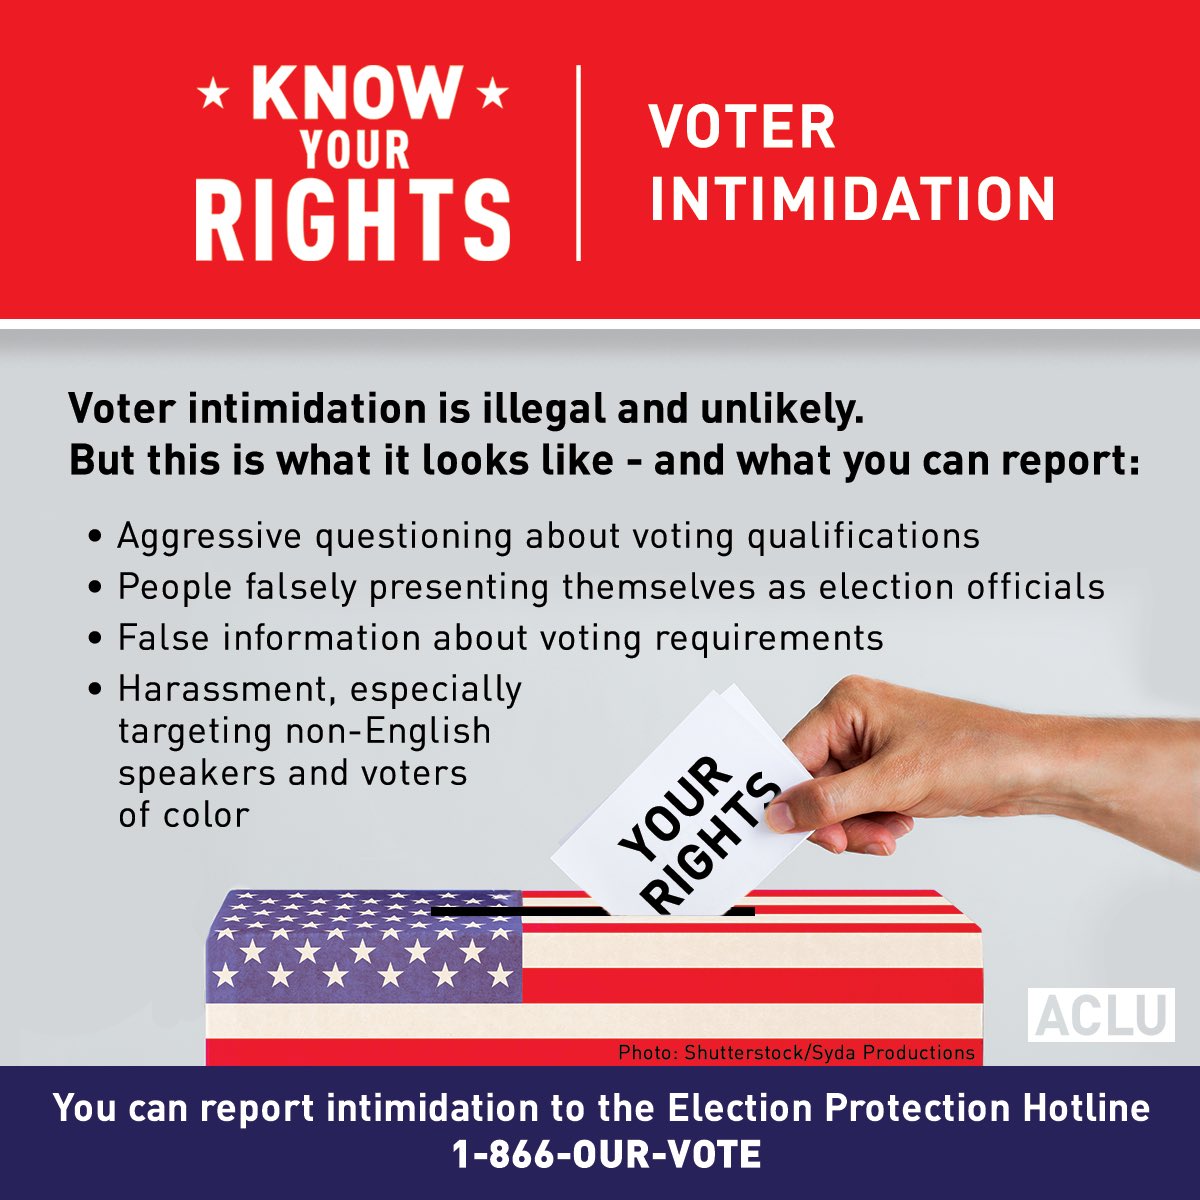 Know your rights! How to report voter intimidation. #ElectionDay https://t.co/qBb1zH6hbb